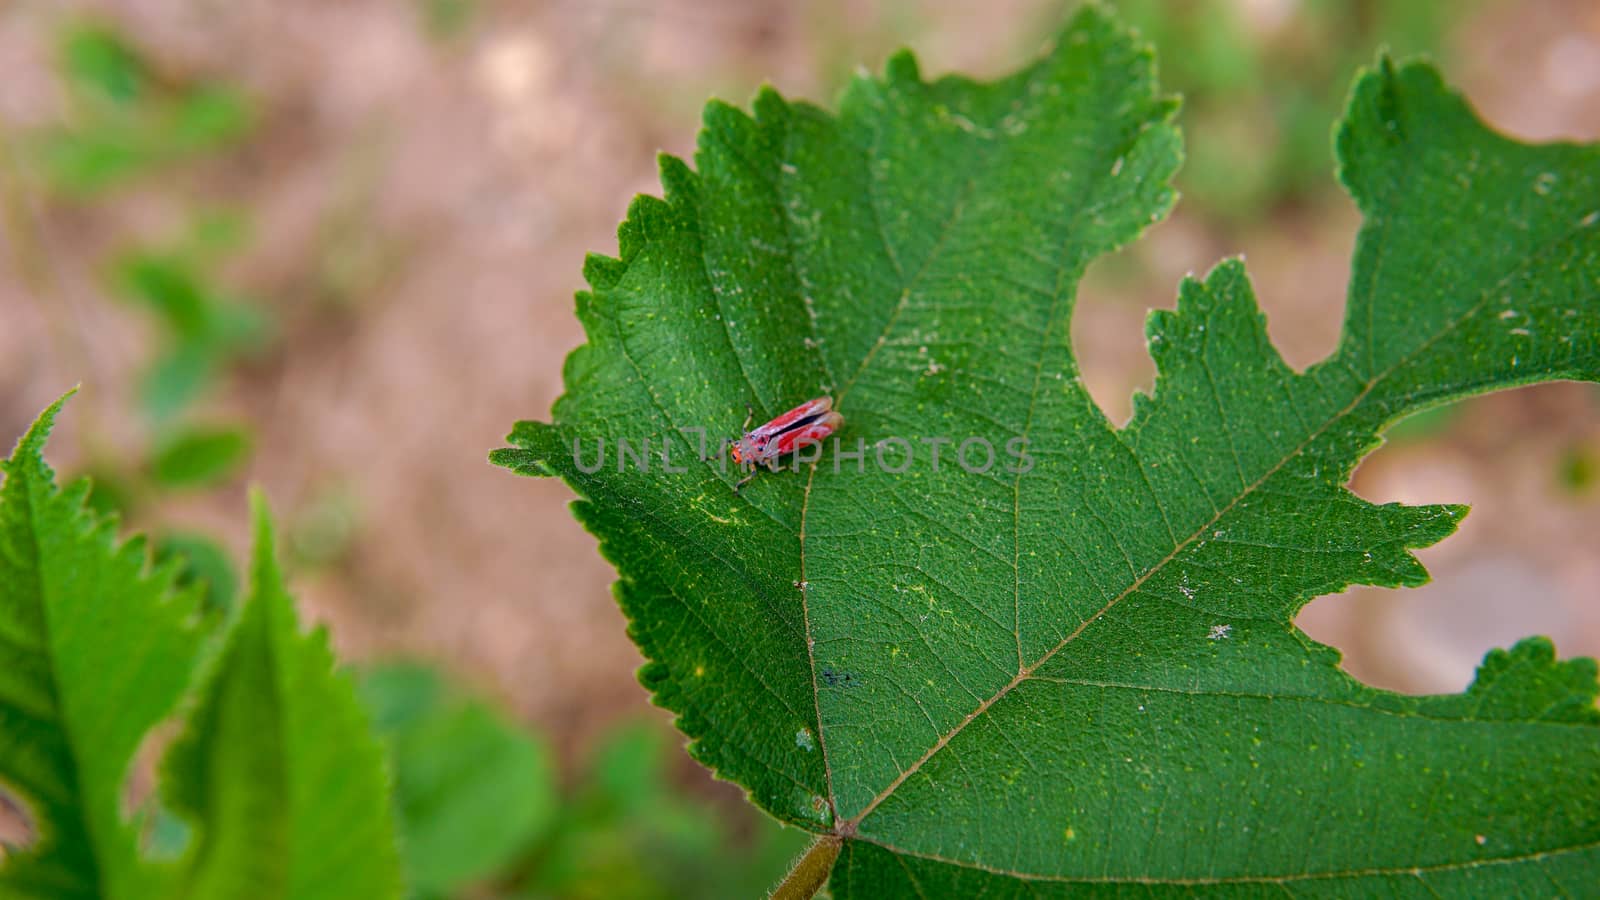 Red insect on a green leaf in the garden